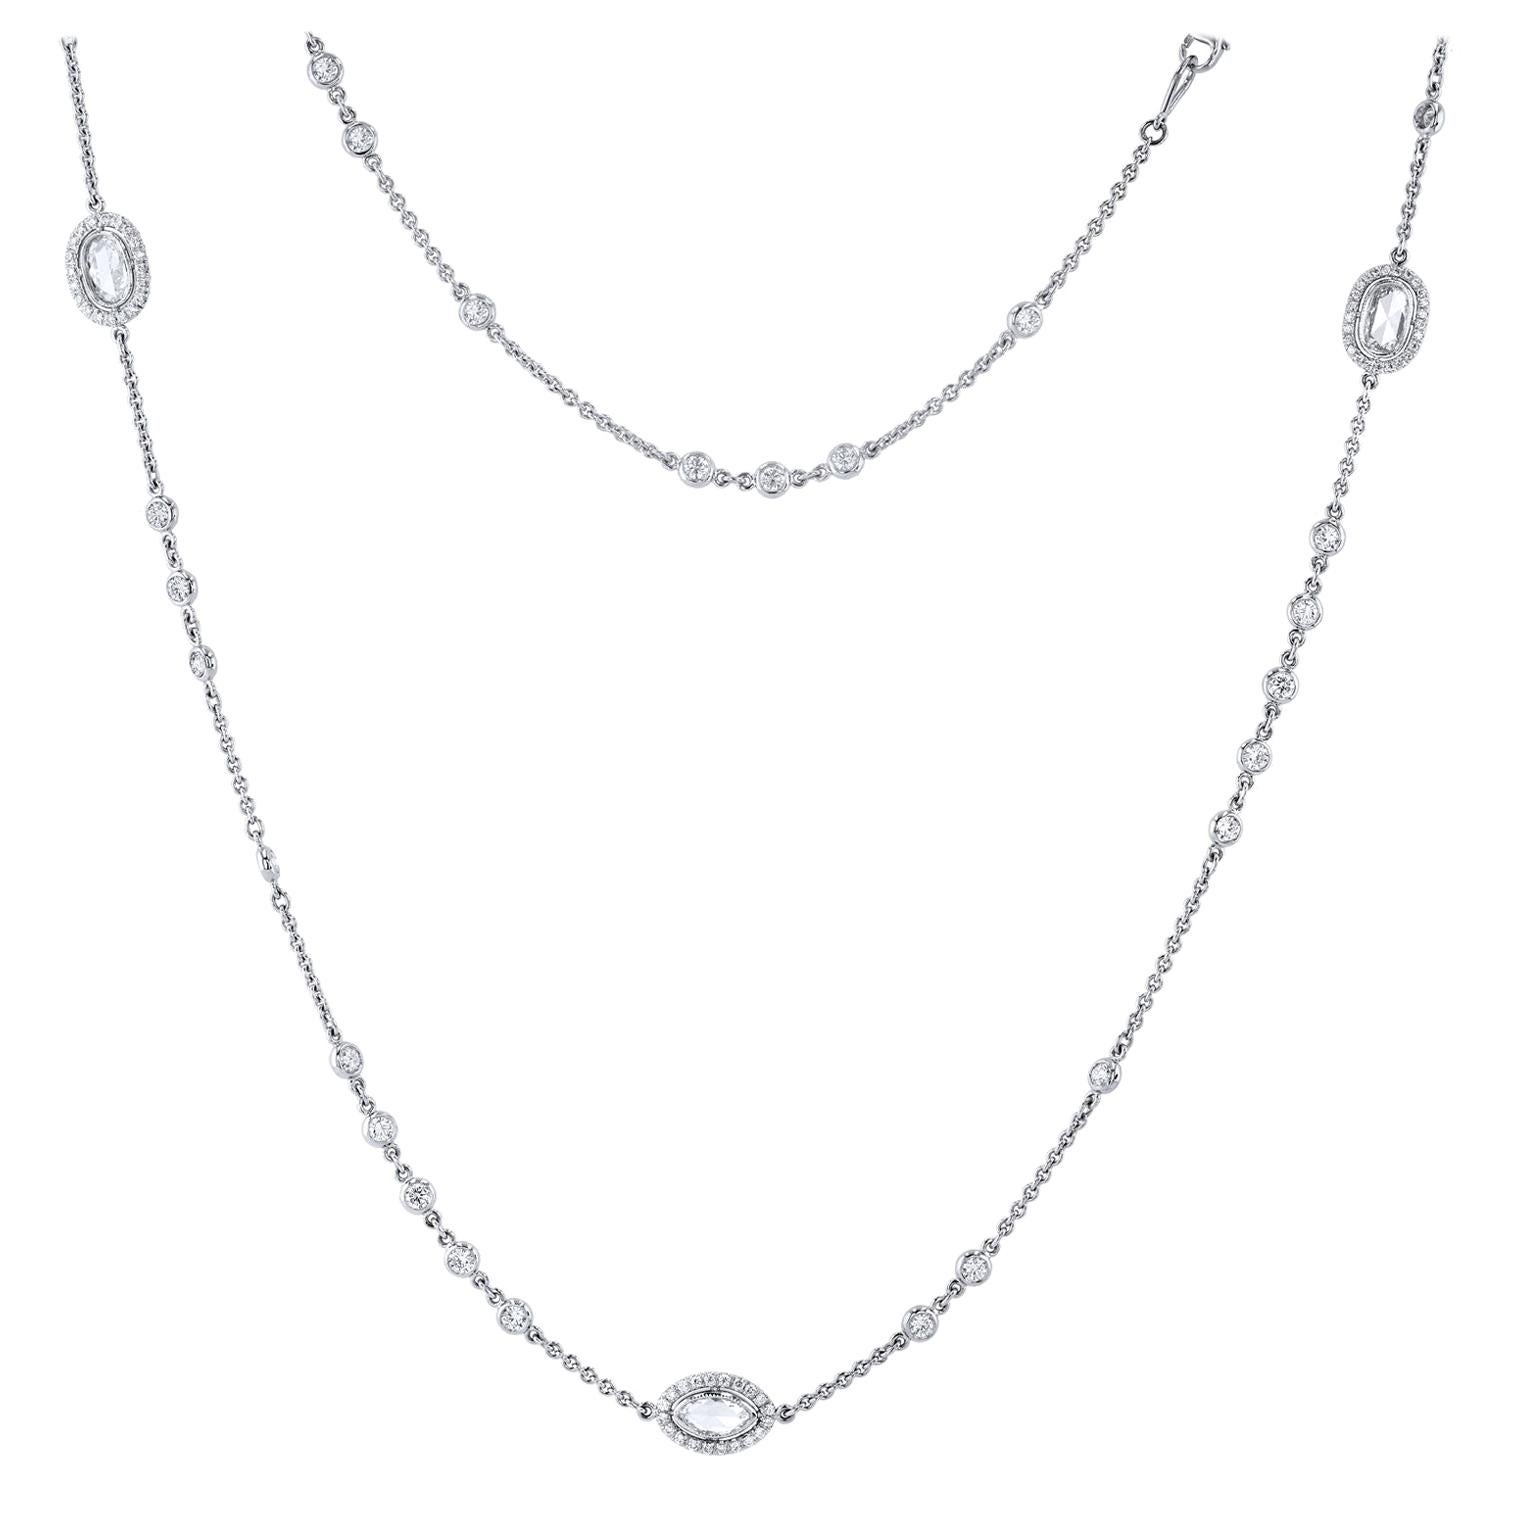 4.98 carats of Bezel set Diamonds by The Yard in 18 karat White Gold Necklace For Sale